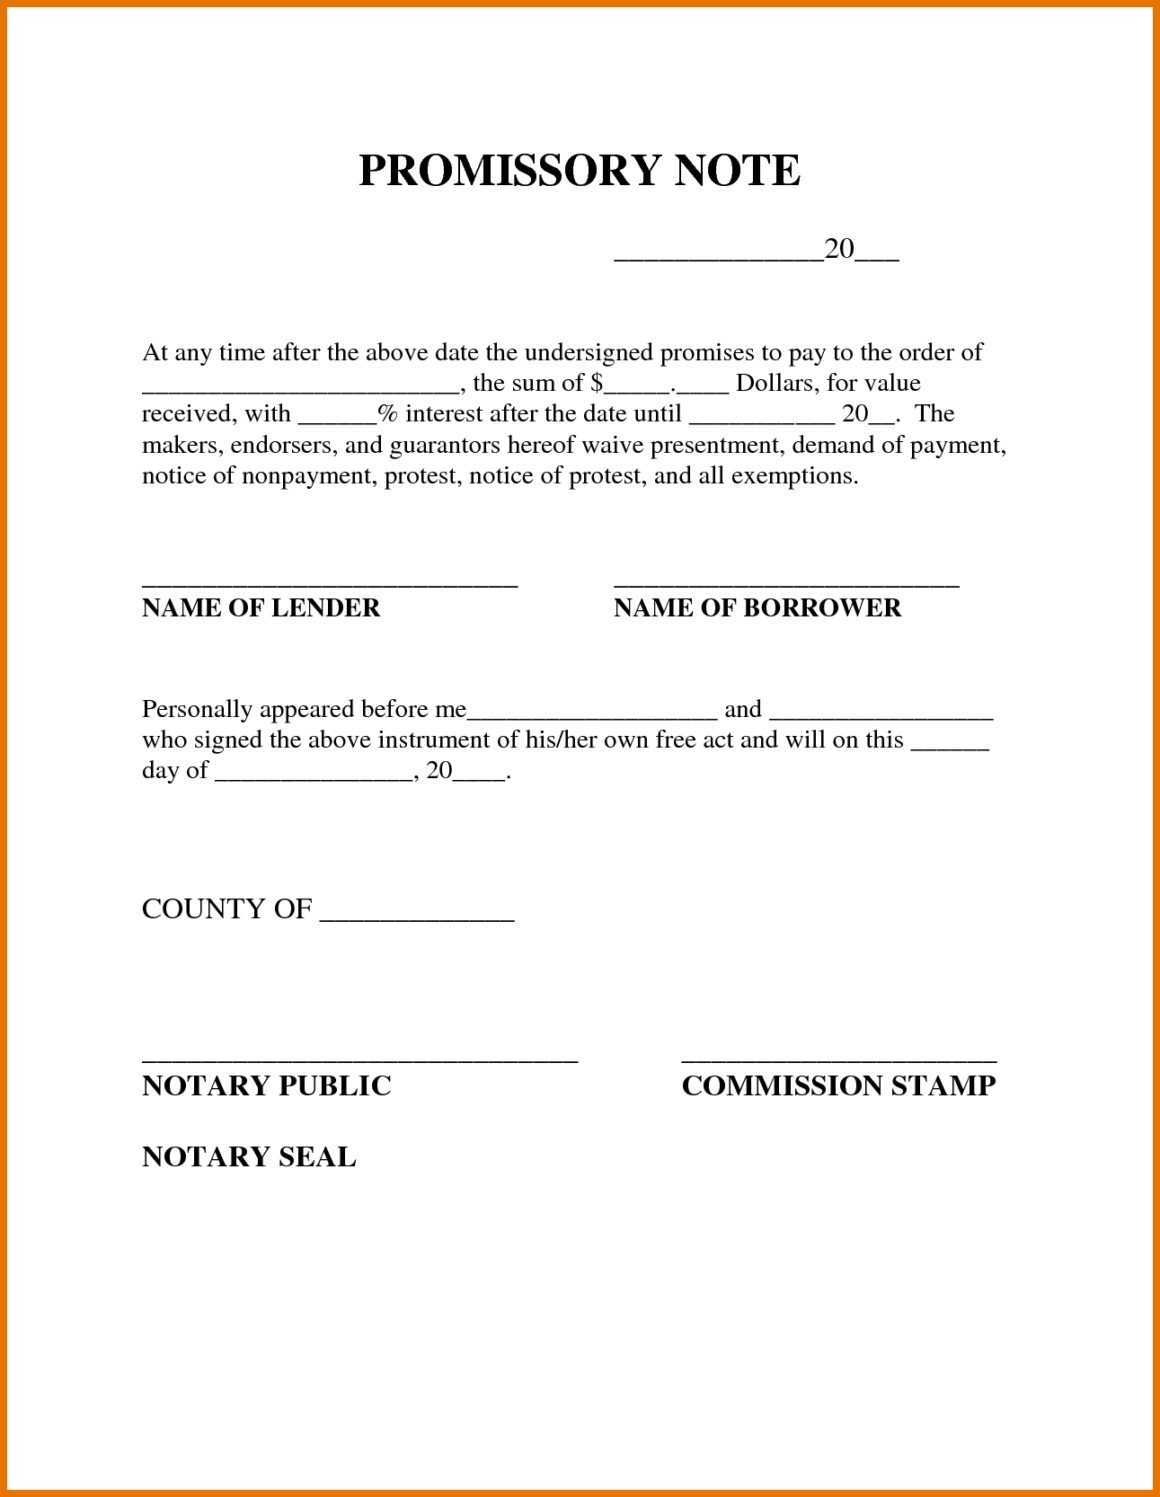 Clever Promissory Note Template From Borrower To Lender For Free Promissory Note Template For Personal Loan